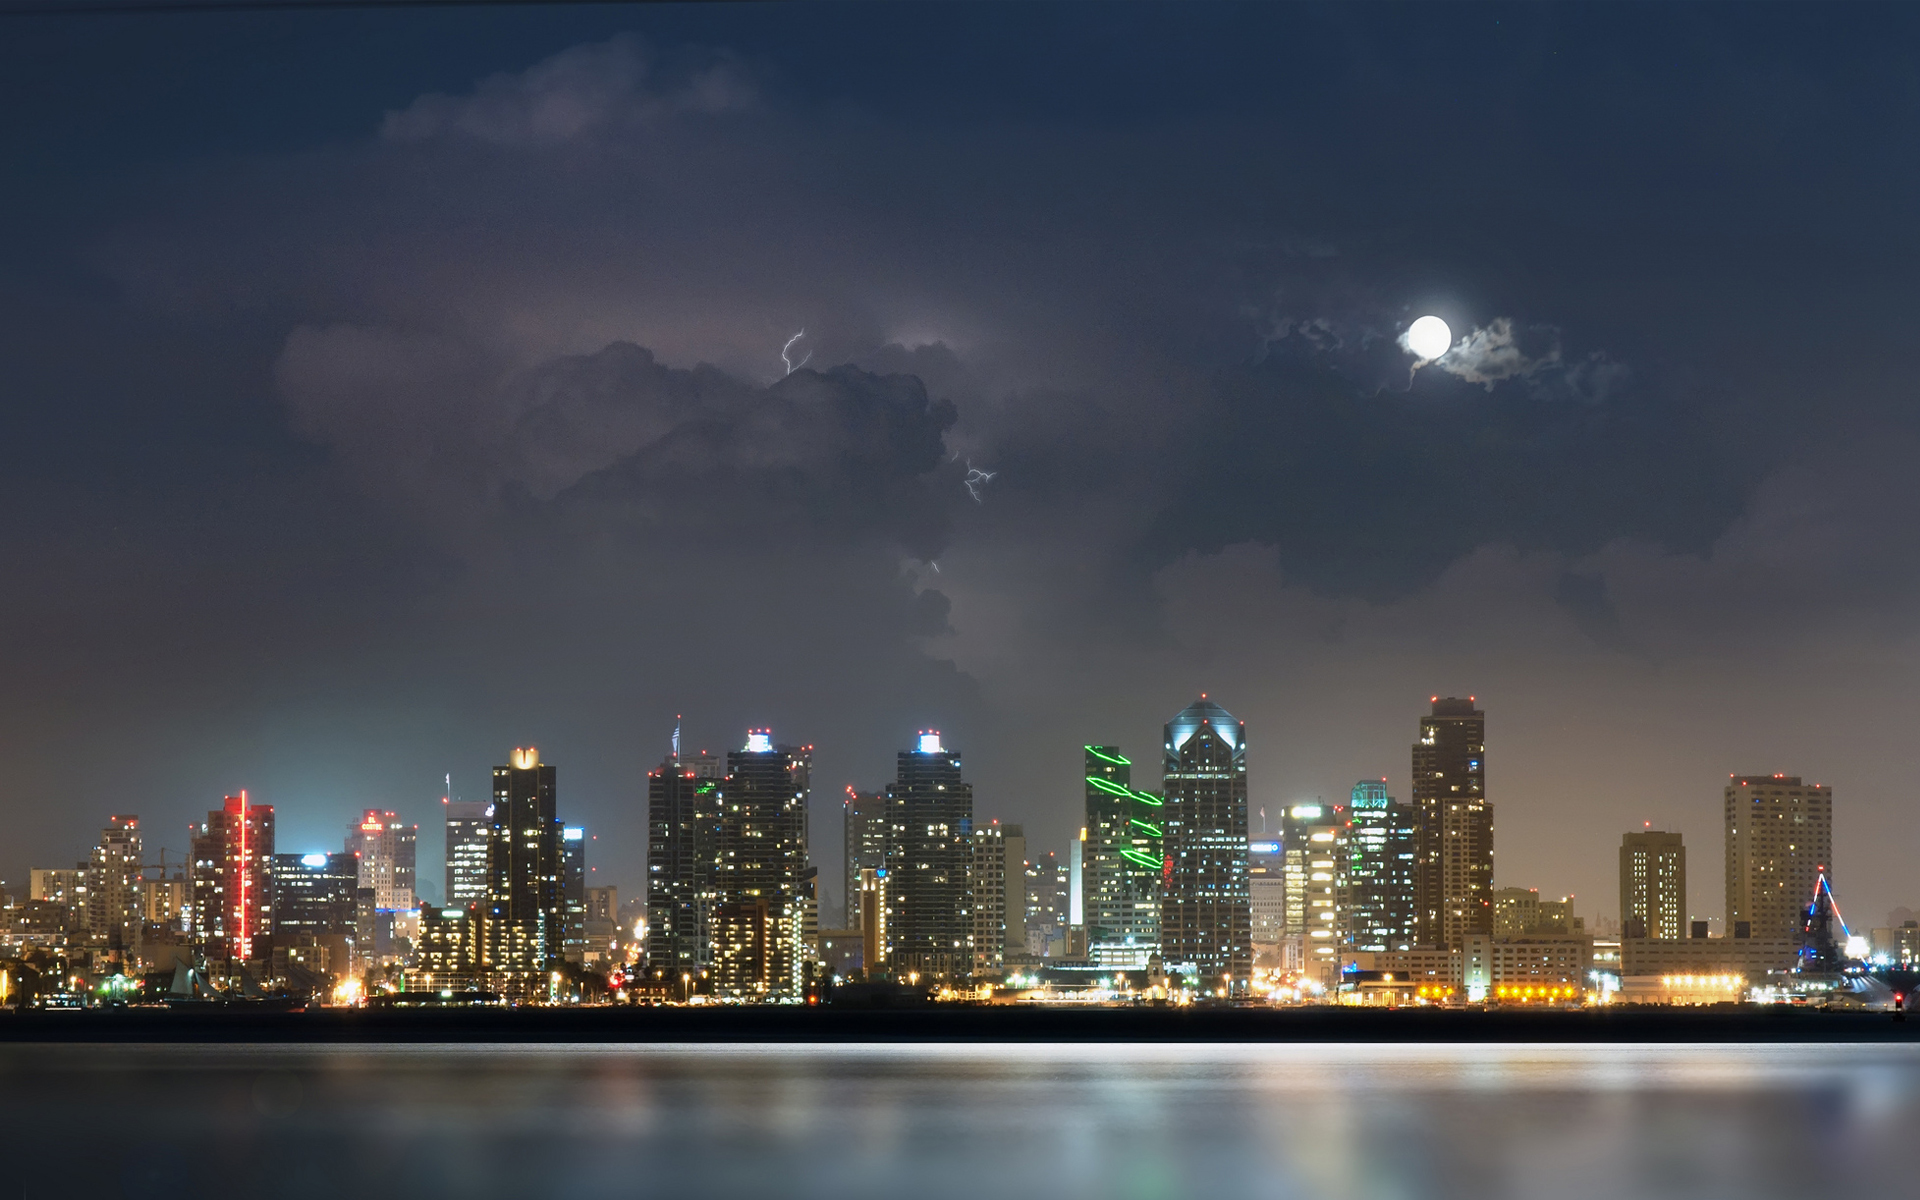 san, Diego, City, Night, River, Water, Lights, Moon, Clouds, Thunder, Lightning, Skyscrapers Wallpaper